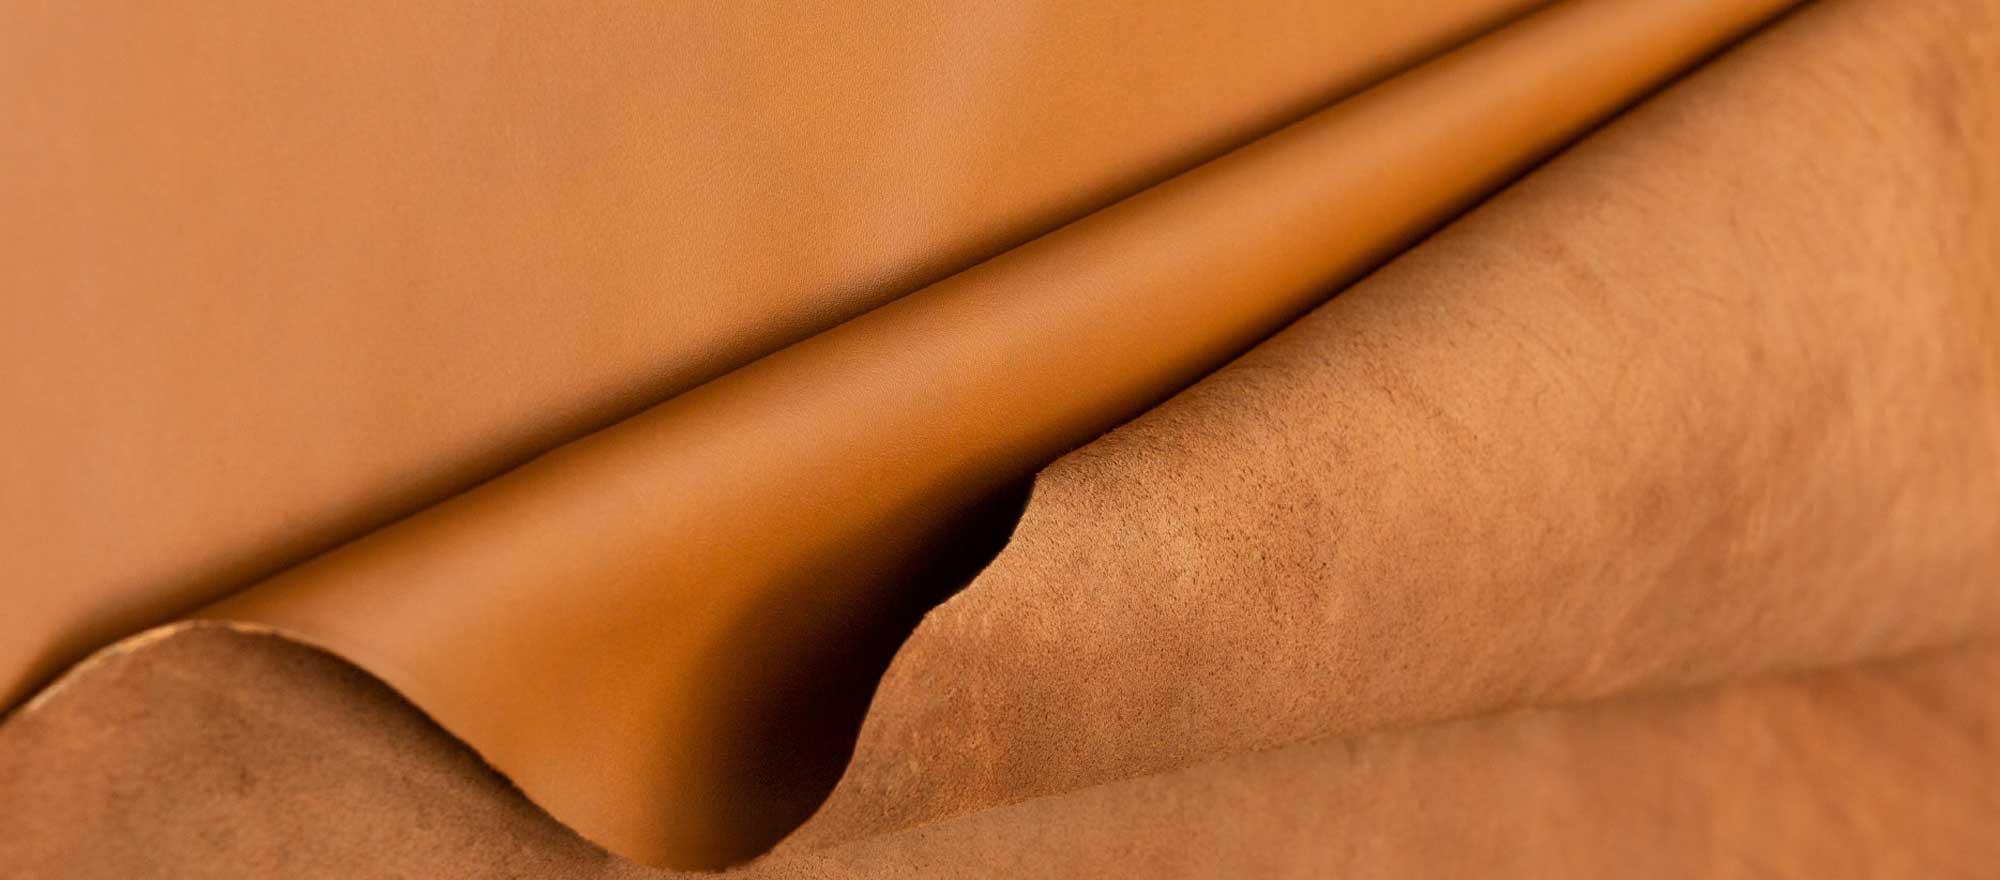 A seat covering from Muirhead Leather is self-cleaning and employs material that’s effective against viruses.